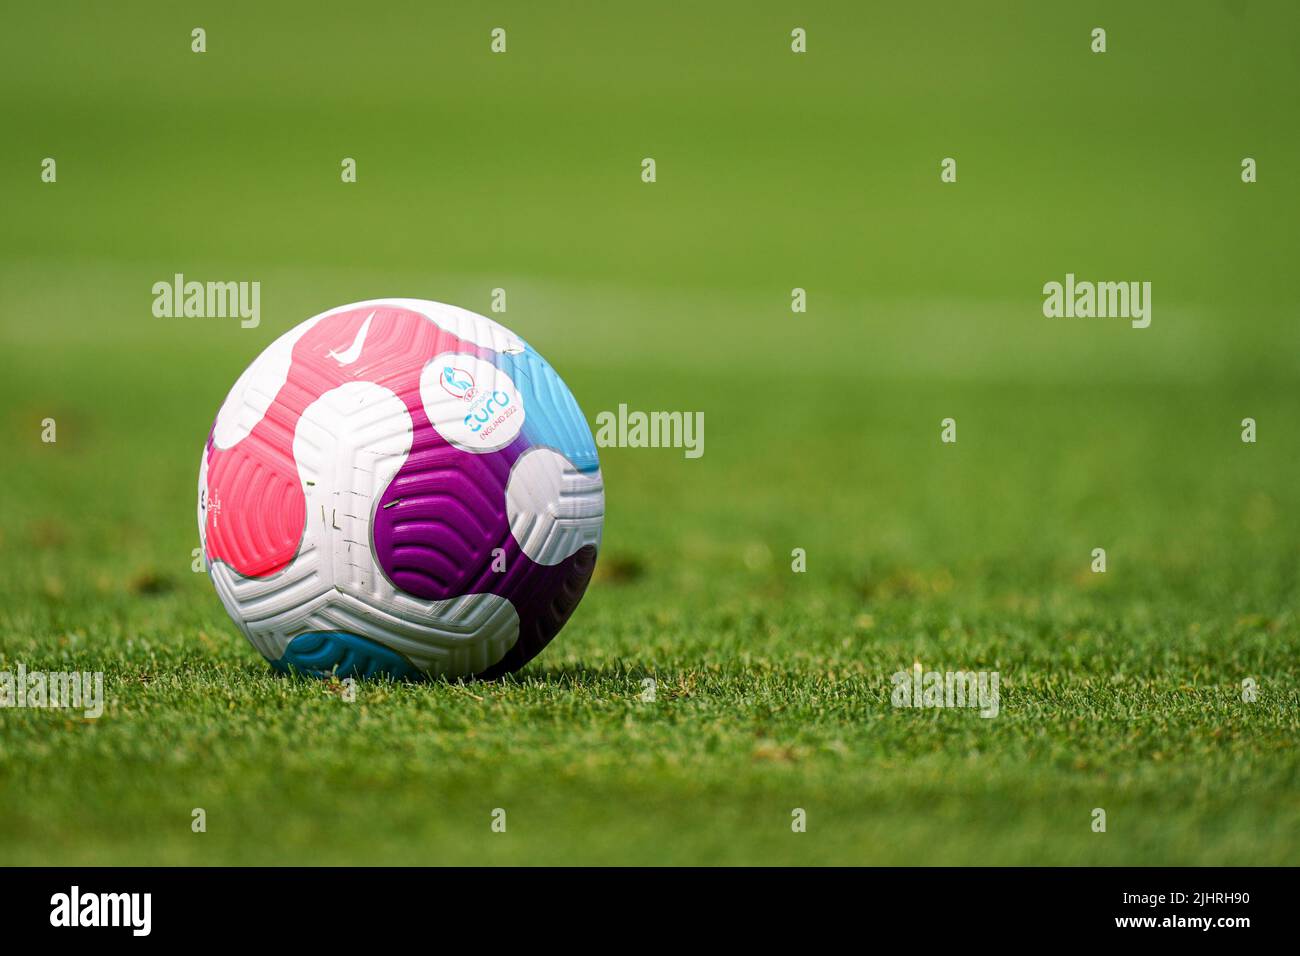 STOCKPORT, UNITED KINGDOM - JULY 20: The official matchball is seen during a Training Session of Netherlands Women at Stockport County Training Centre on July 20, 2022 in Stockport, United Kingdom. (Photo by Joris Verwijst/Orange Pictures) Stock Photo